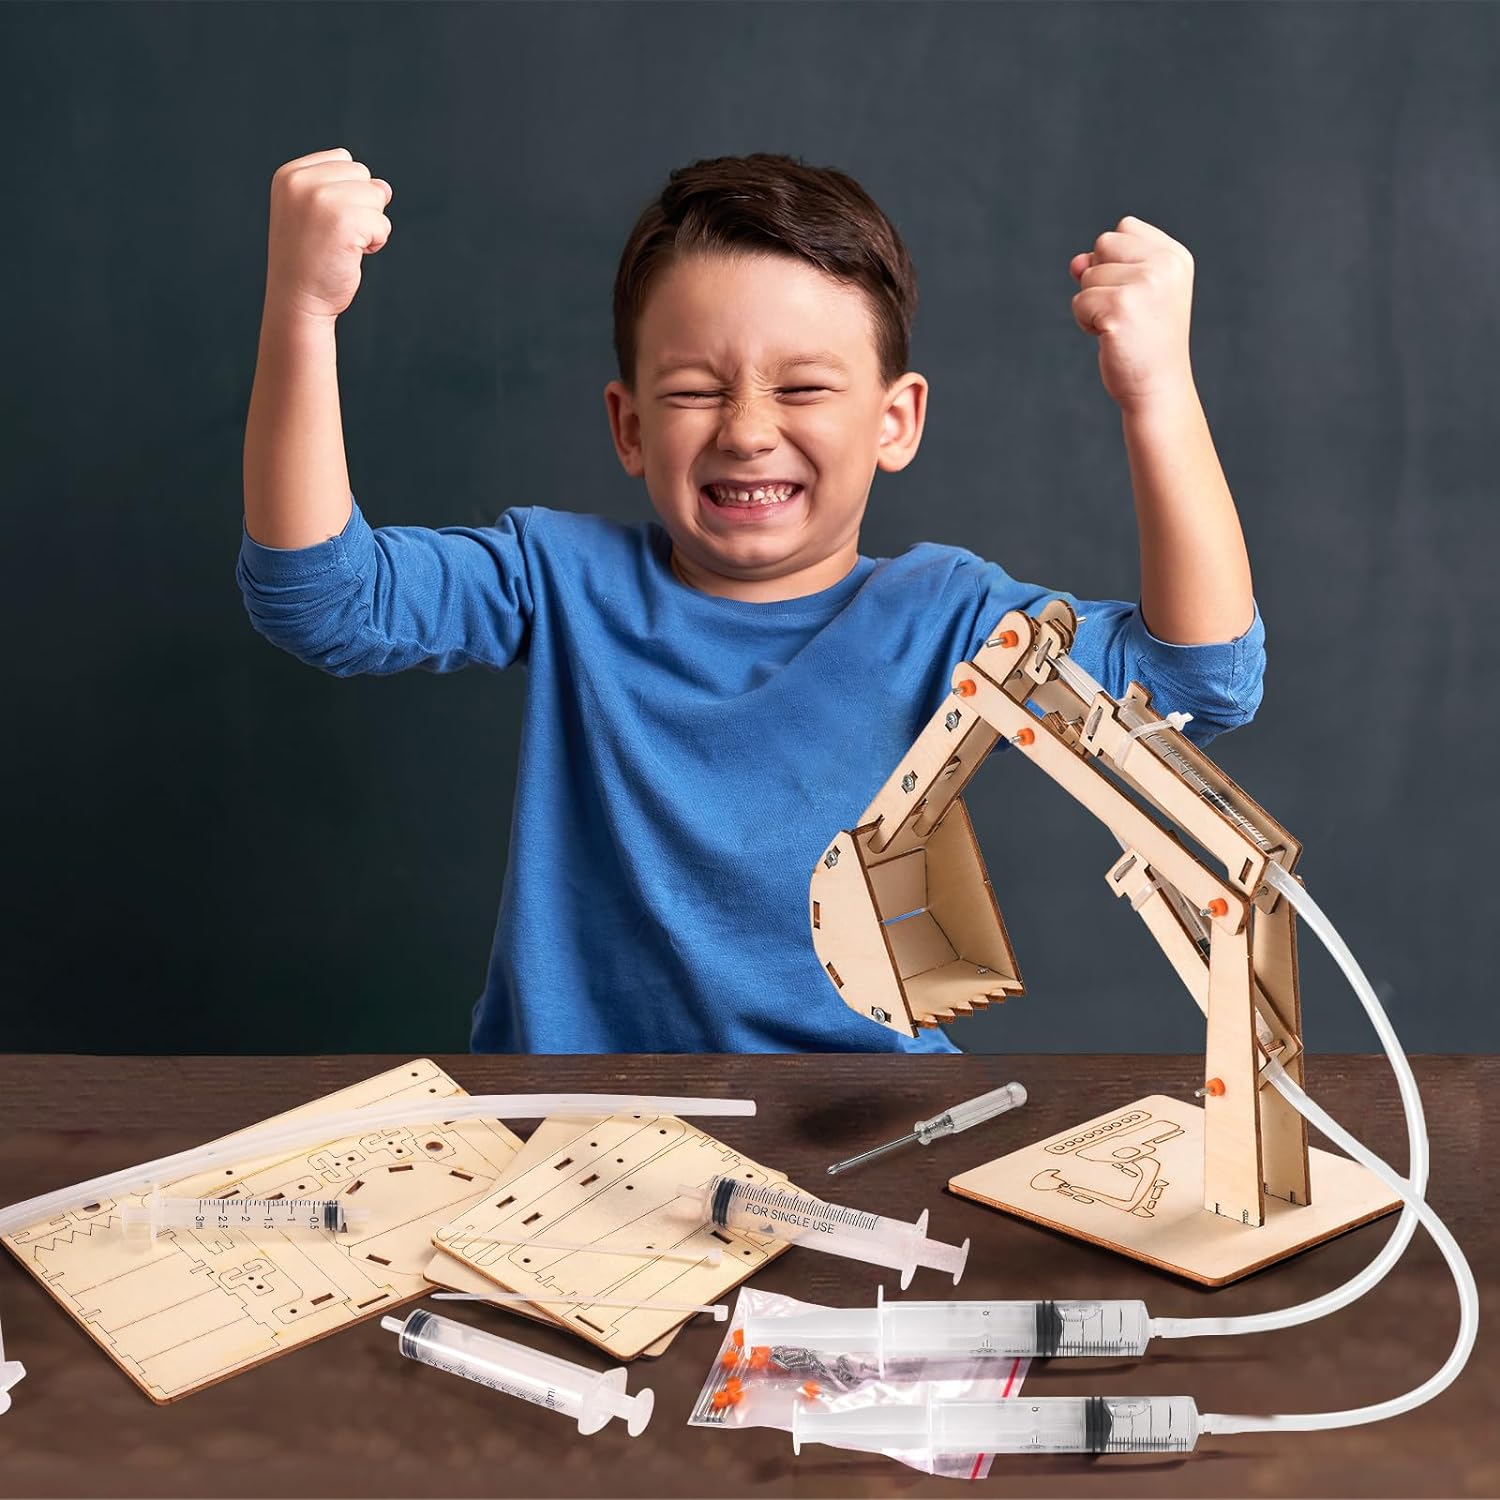 STEM Science Kits, 5 Set Building Kits for Kids Ages 8-12, 3D Wooden Puzzles, Wood Crafts for Boys 6-8, Science Experiment Projects, Woodworking Model Kit, STEM Toys for 6 7 8 9 10 11 12 14 Years Old : Toys Games